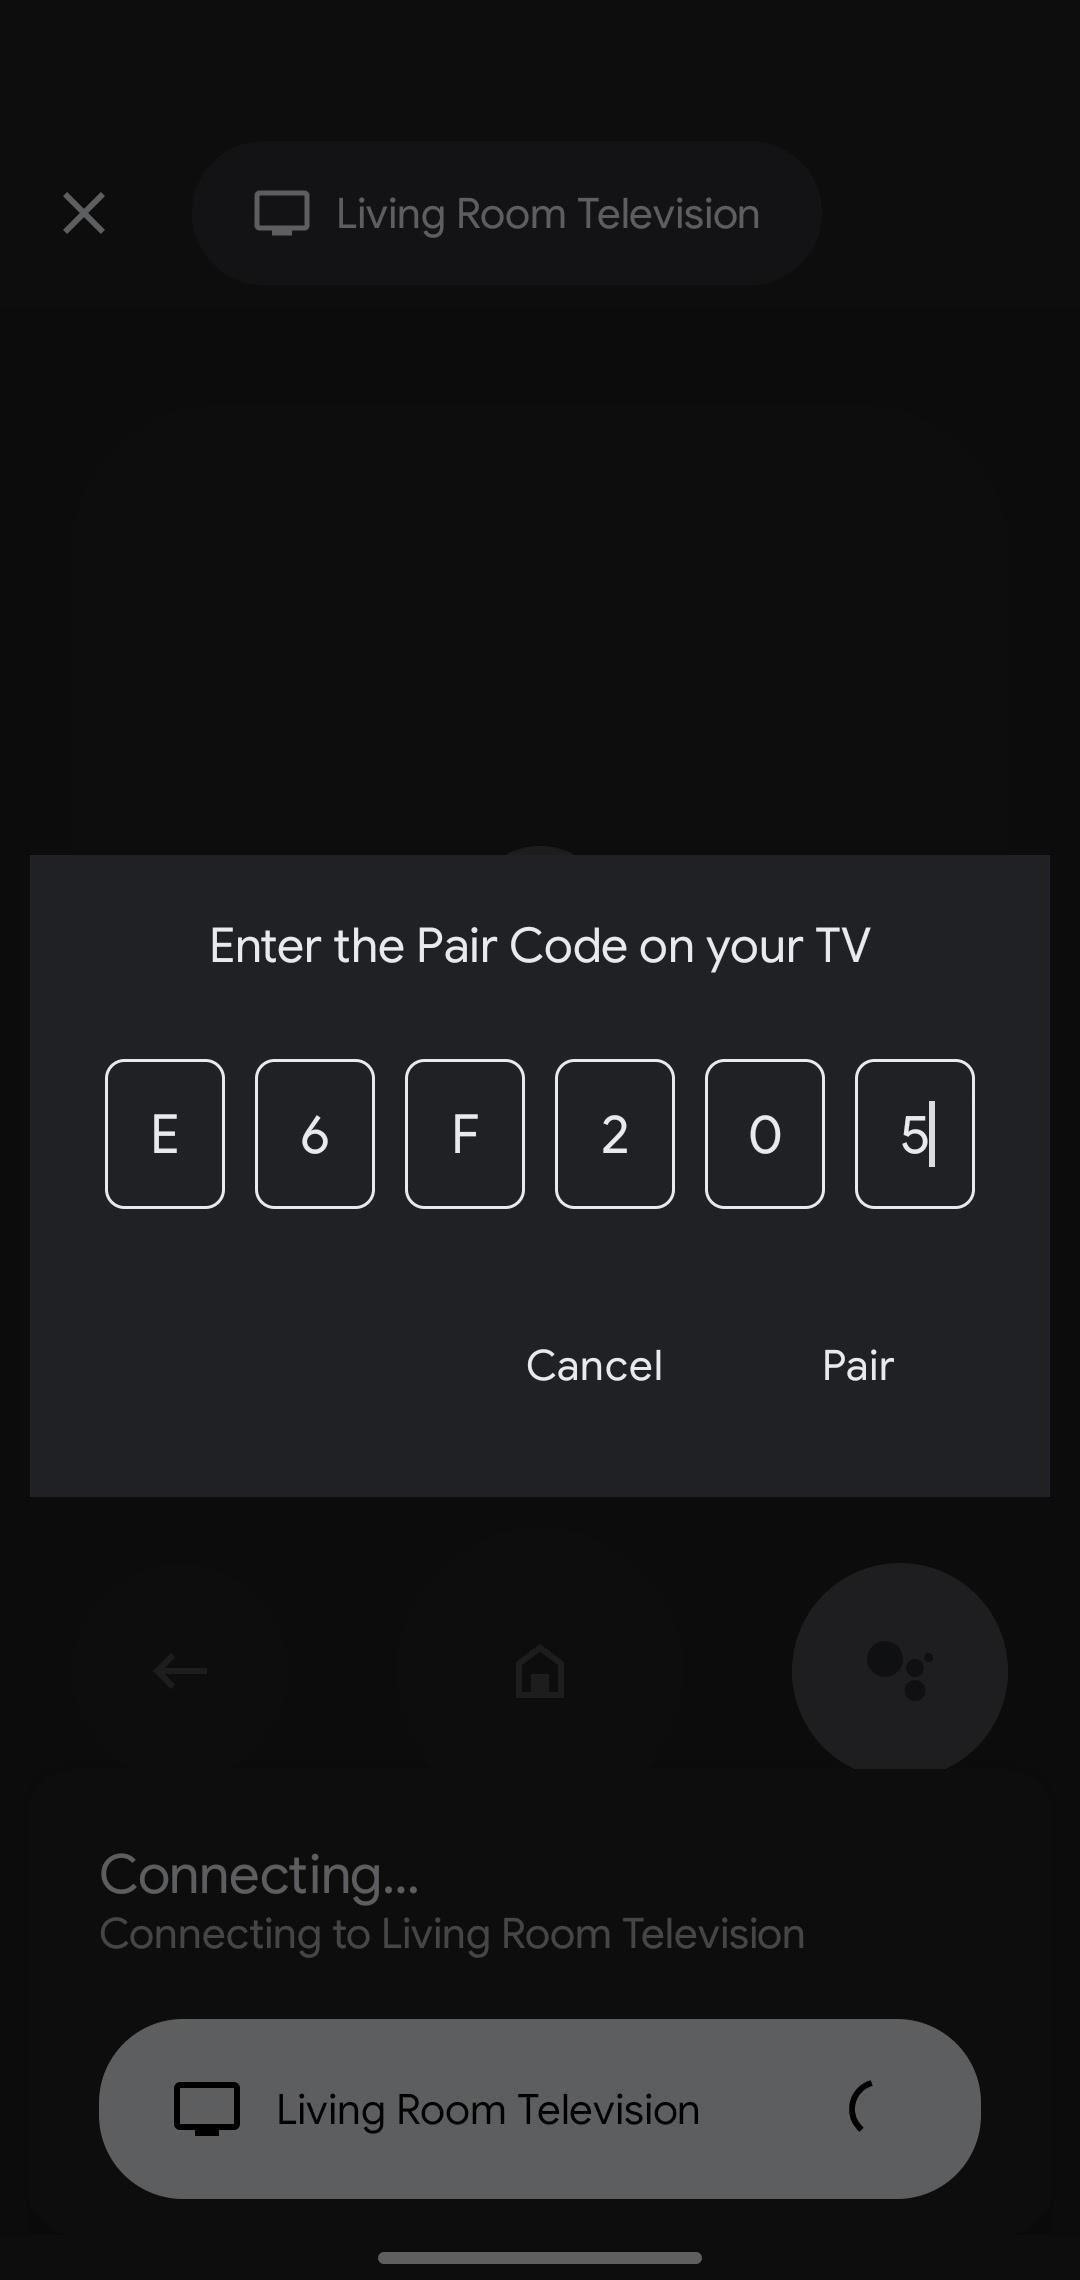 How to Use Your iPhone or Android Phone as a Remote for Android TV or Google TV